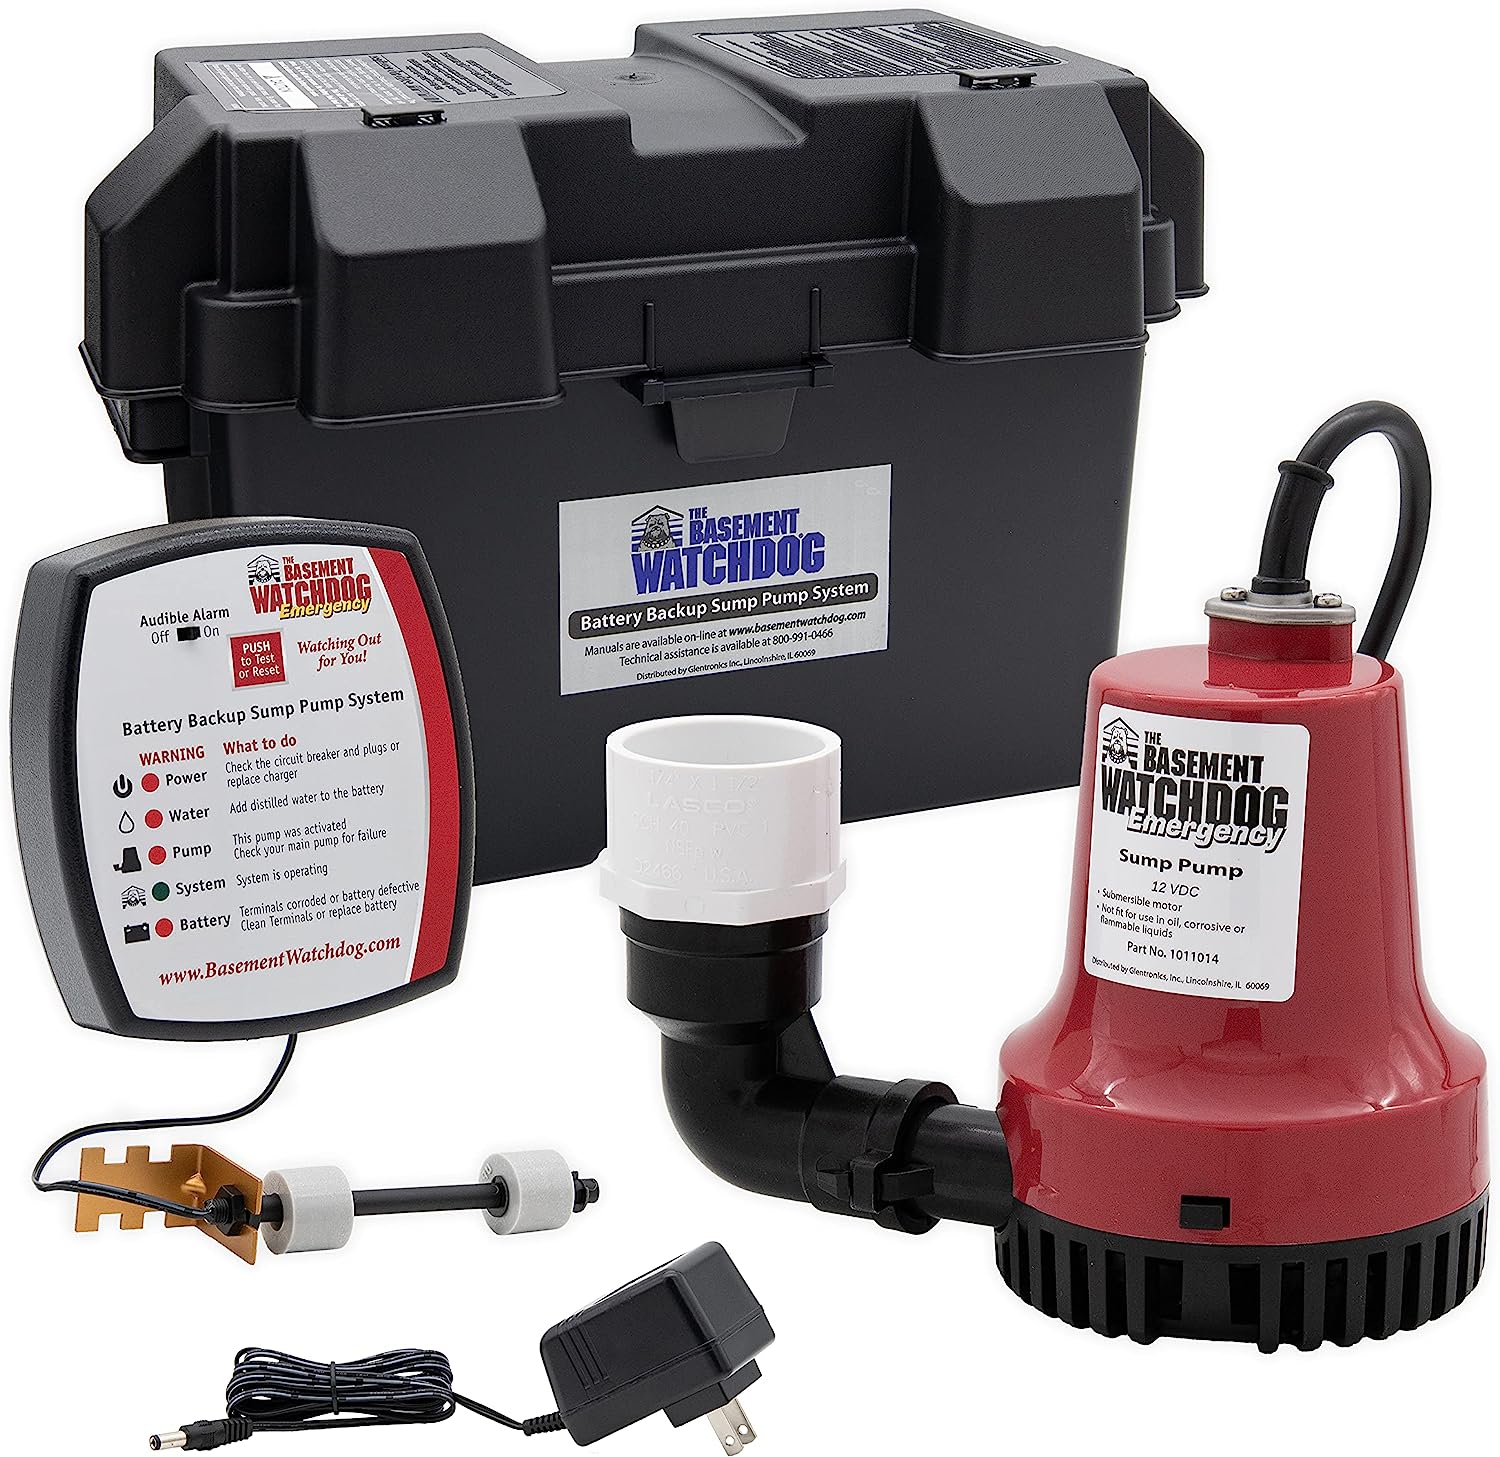 battery backup sump pump system product comparison